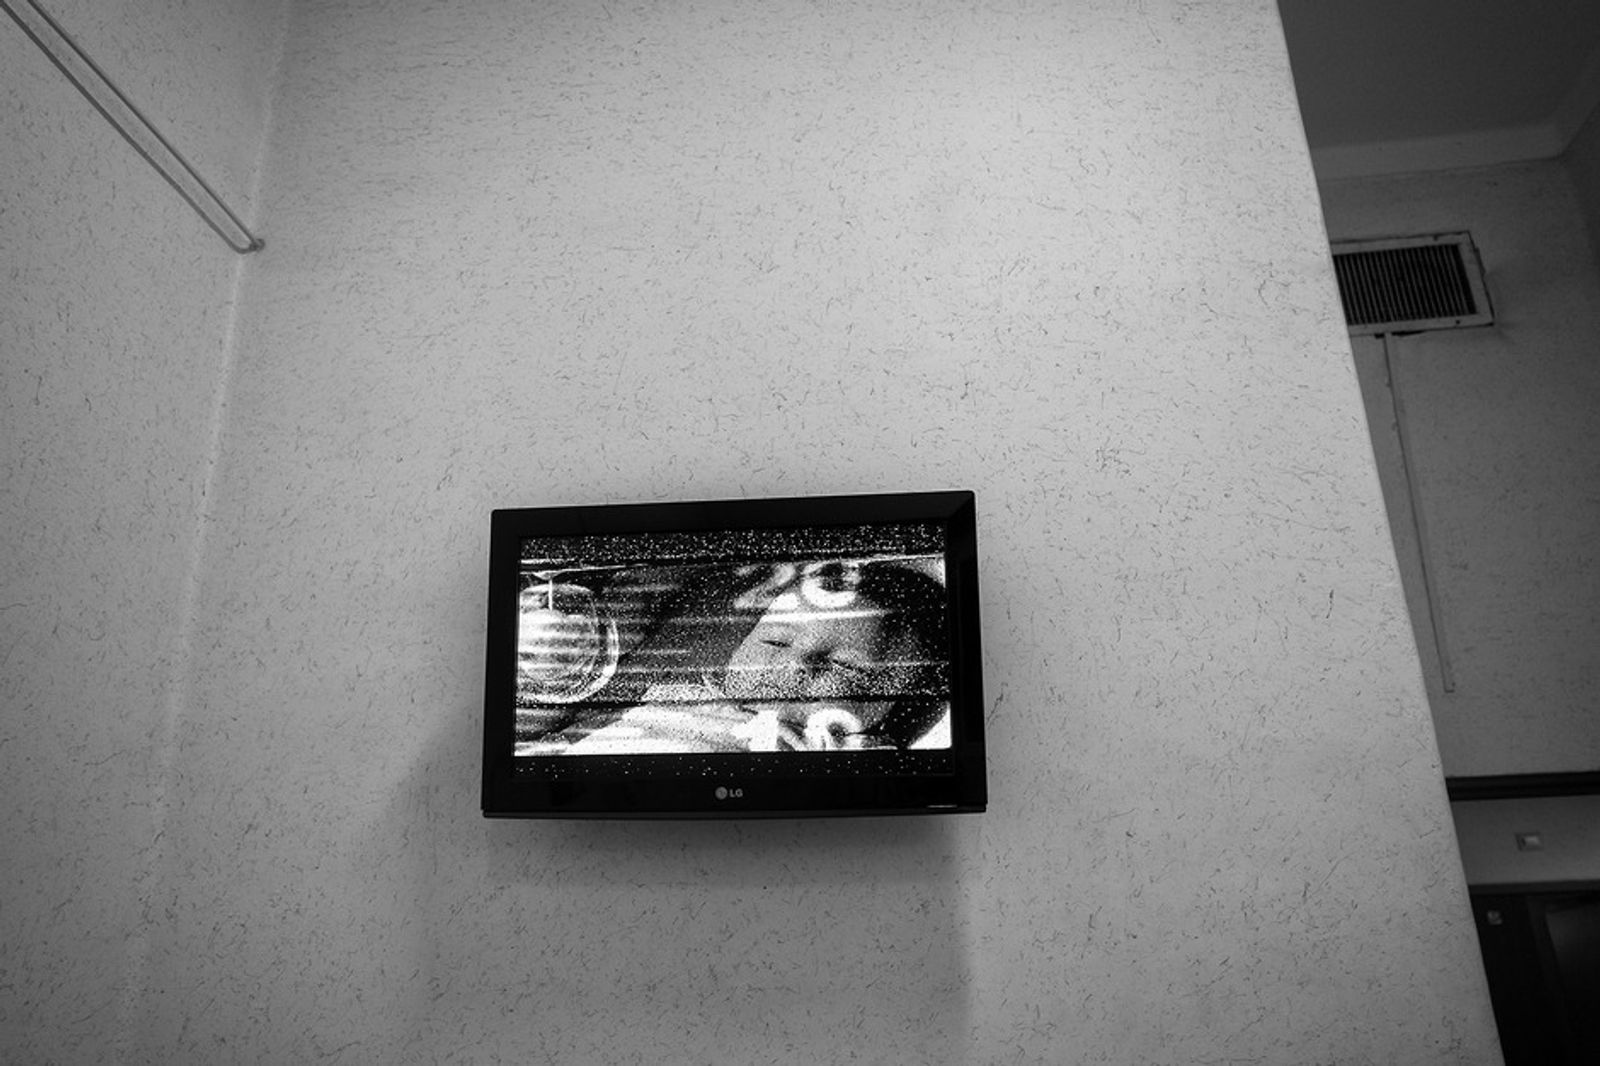 © Khashayar Sharifaee - A TV in a hospital that my grandfather was hospitalized, showing born of a baby.